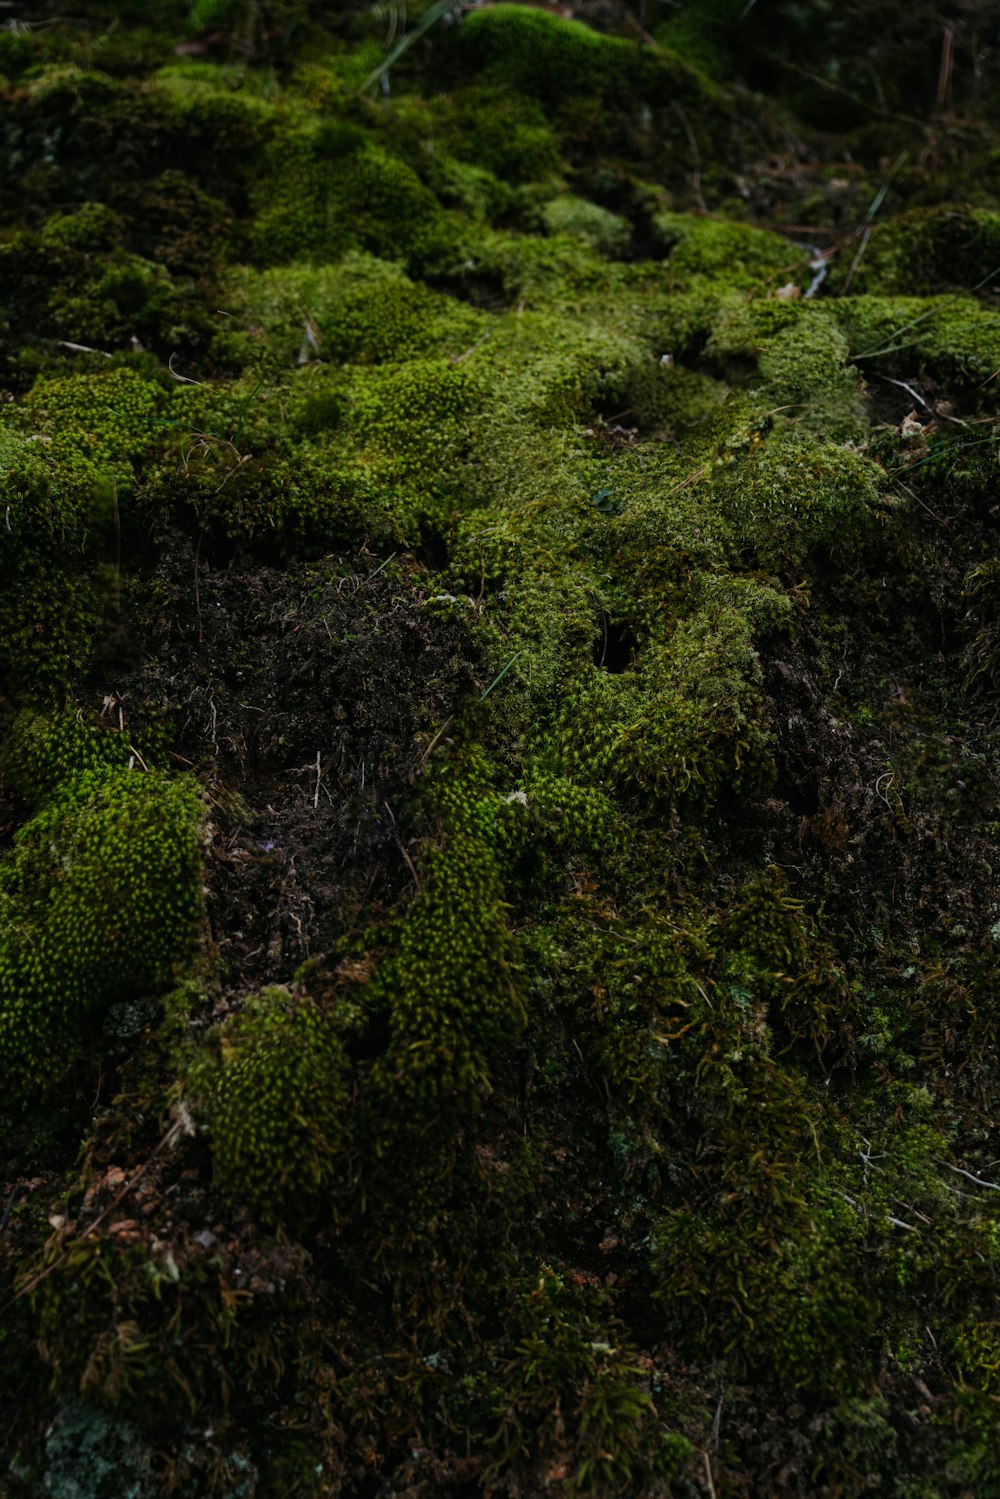 a close up of a patch of moss on the ground